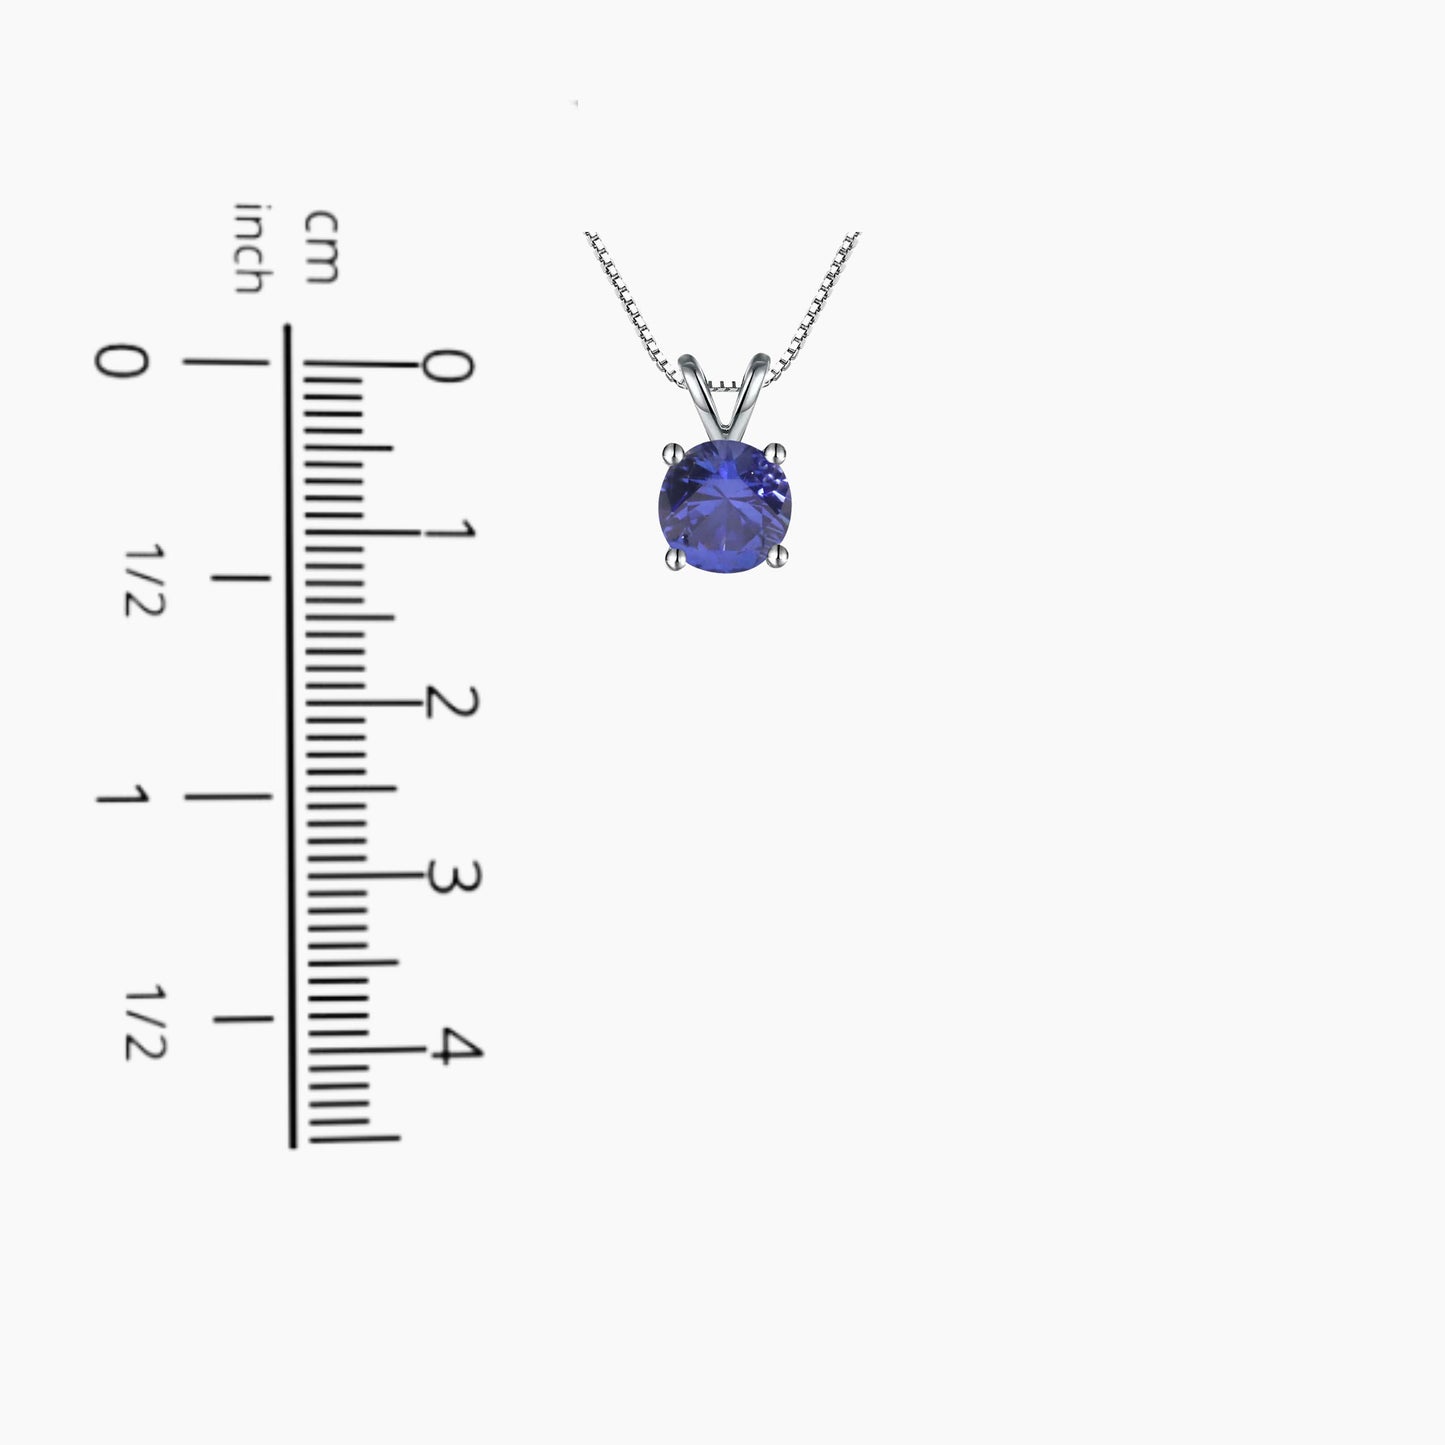 Irosk Round Cut Necklace in Sterling Silver -  Tanzanite